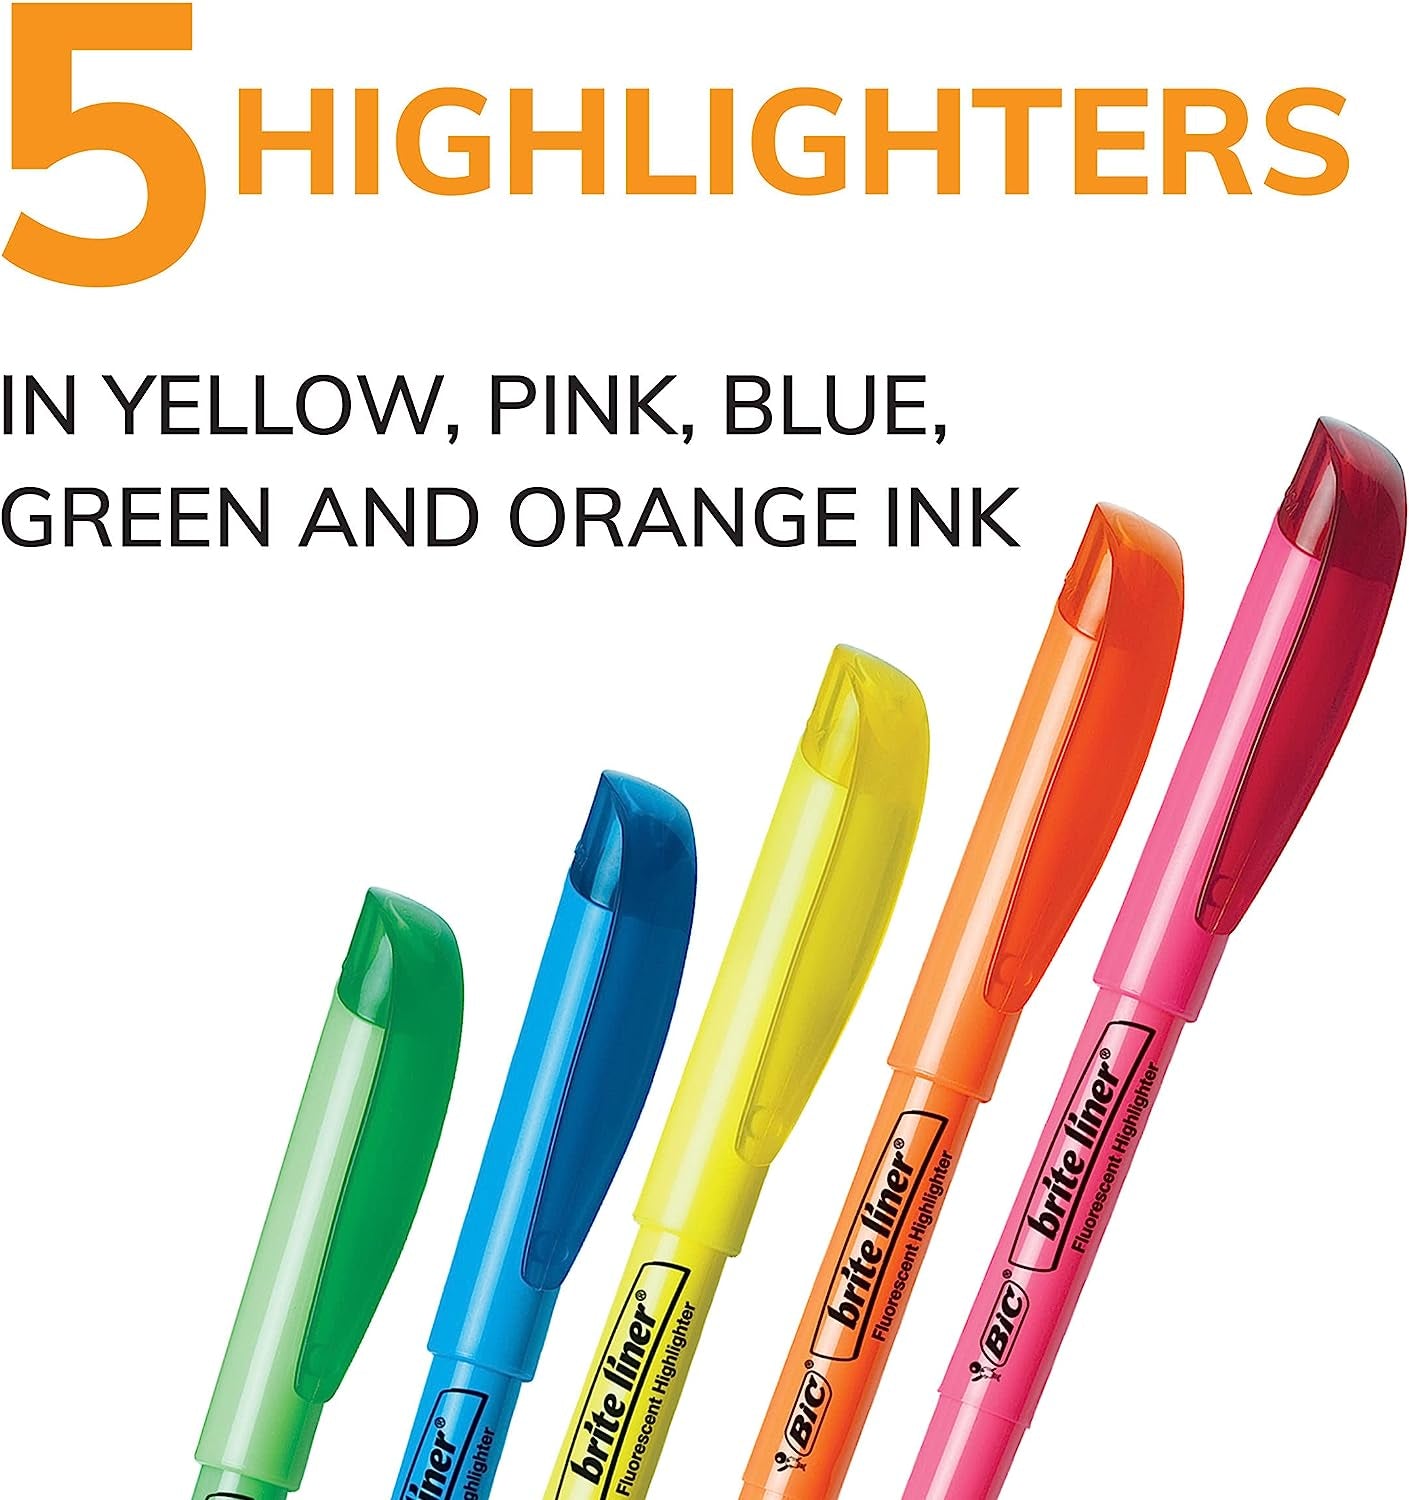 Brite Liner Highlighters, Chisel Tip, 5-Count Pack of Highlighters Assorted Colors, Ideal Highlighter Set for Organizing and Coloring